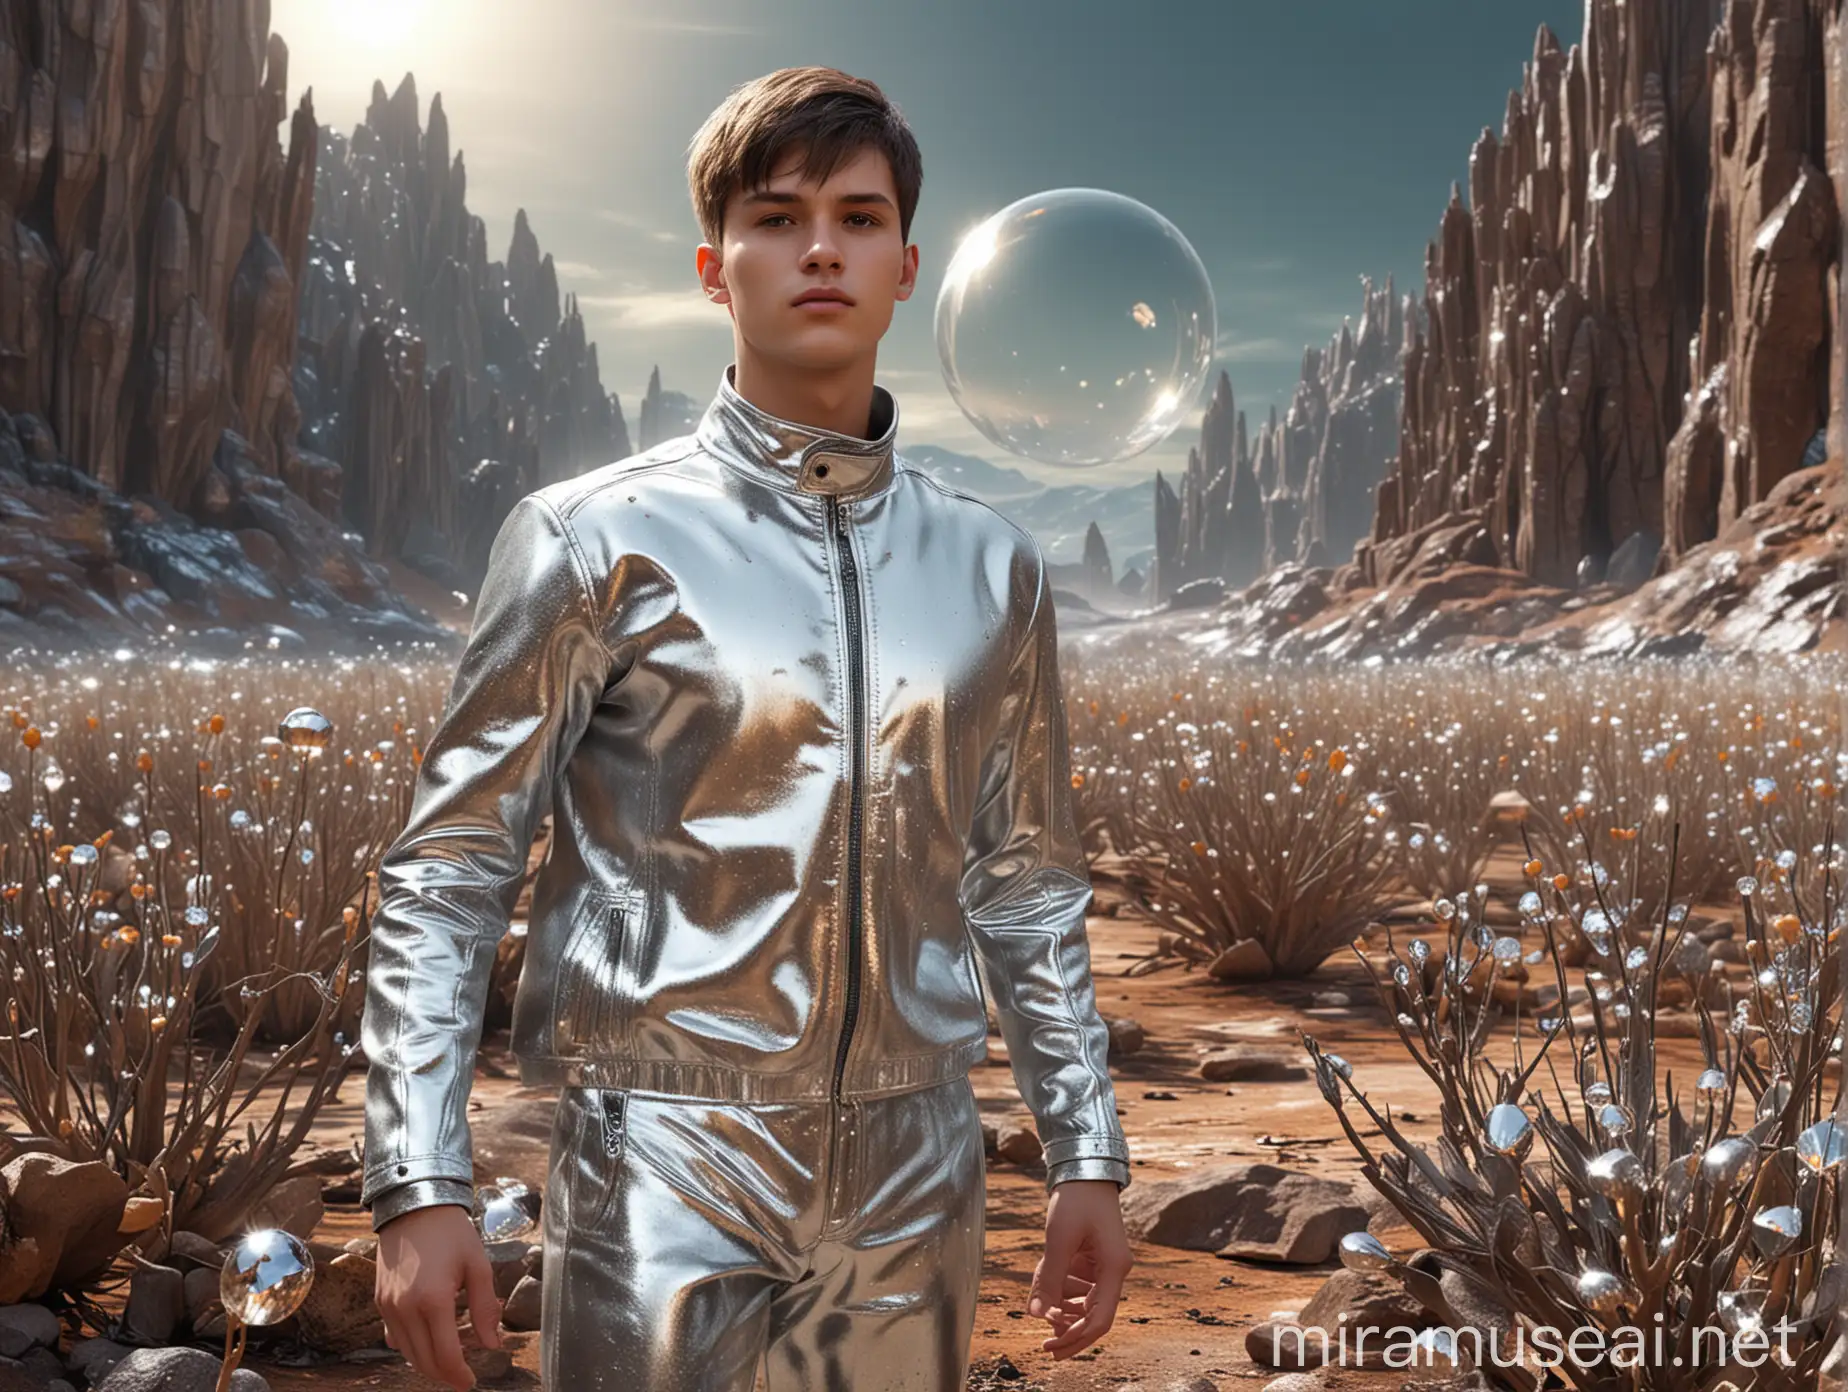 Attractive Young Man in Metallic Silver Outfit on Alien Planet